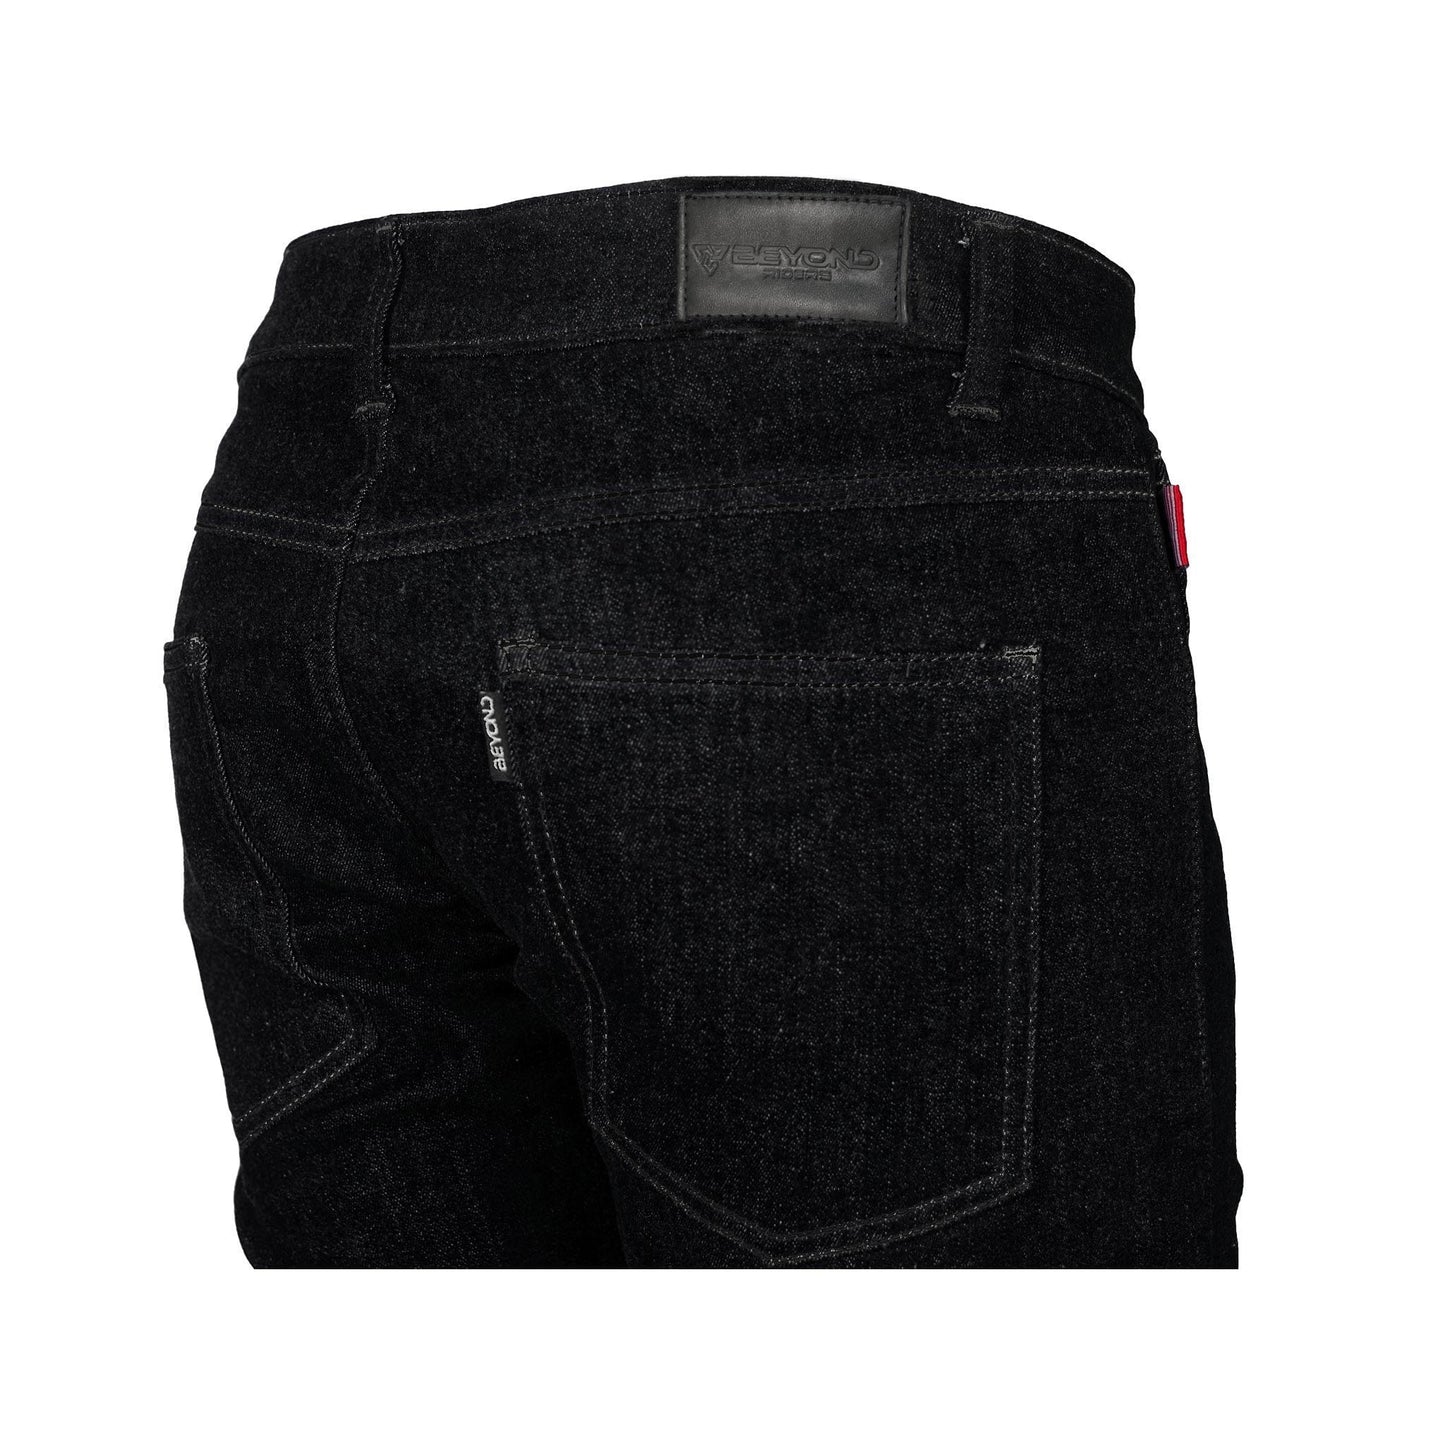 Protective Jeans - Black with Level 1 Pads